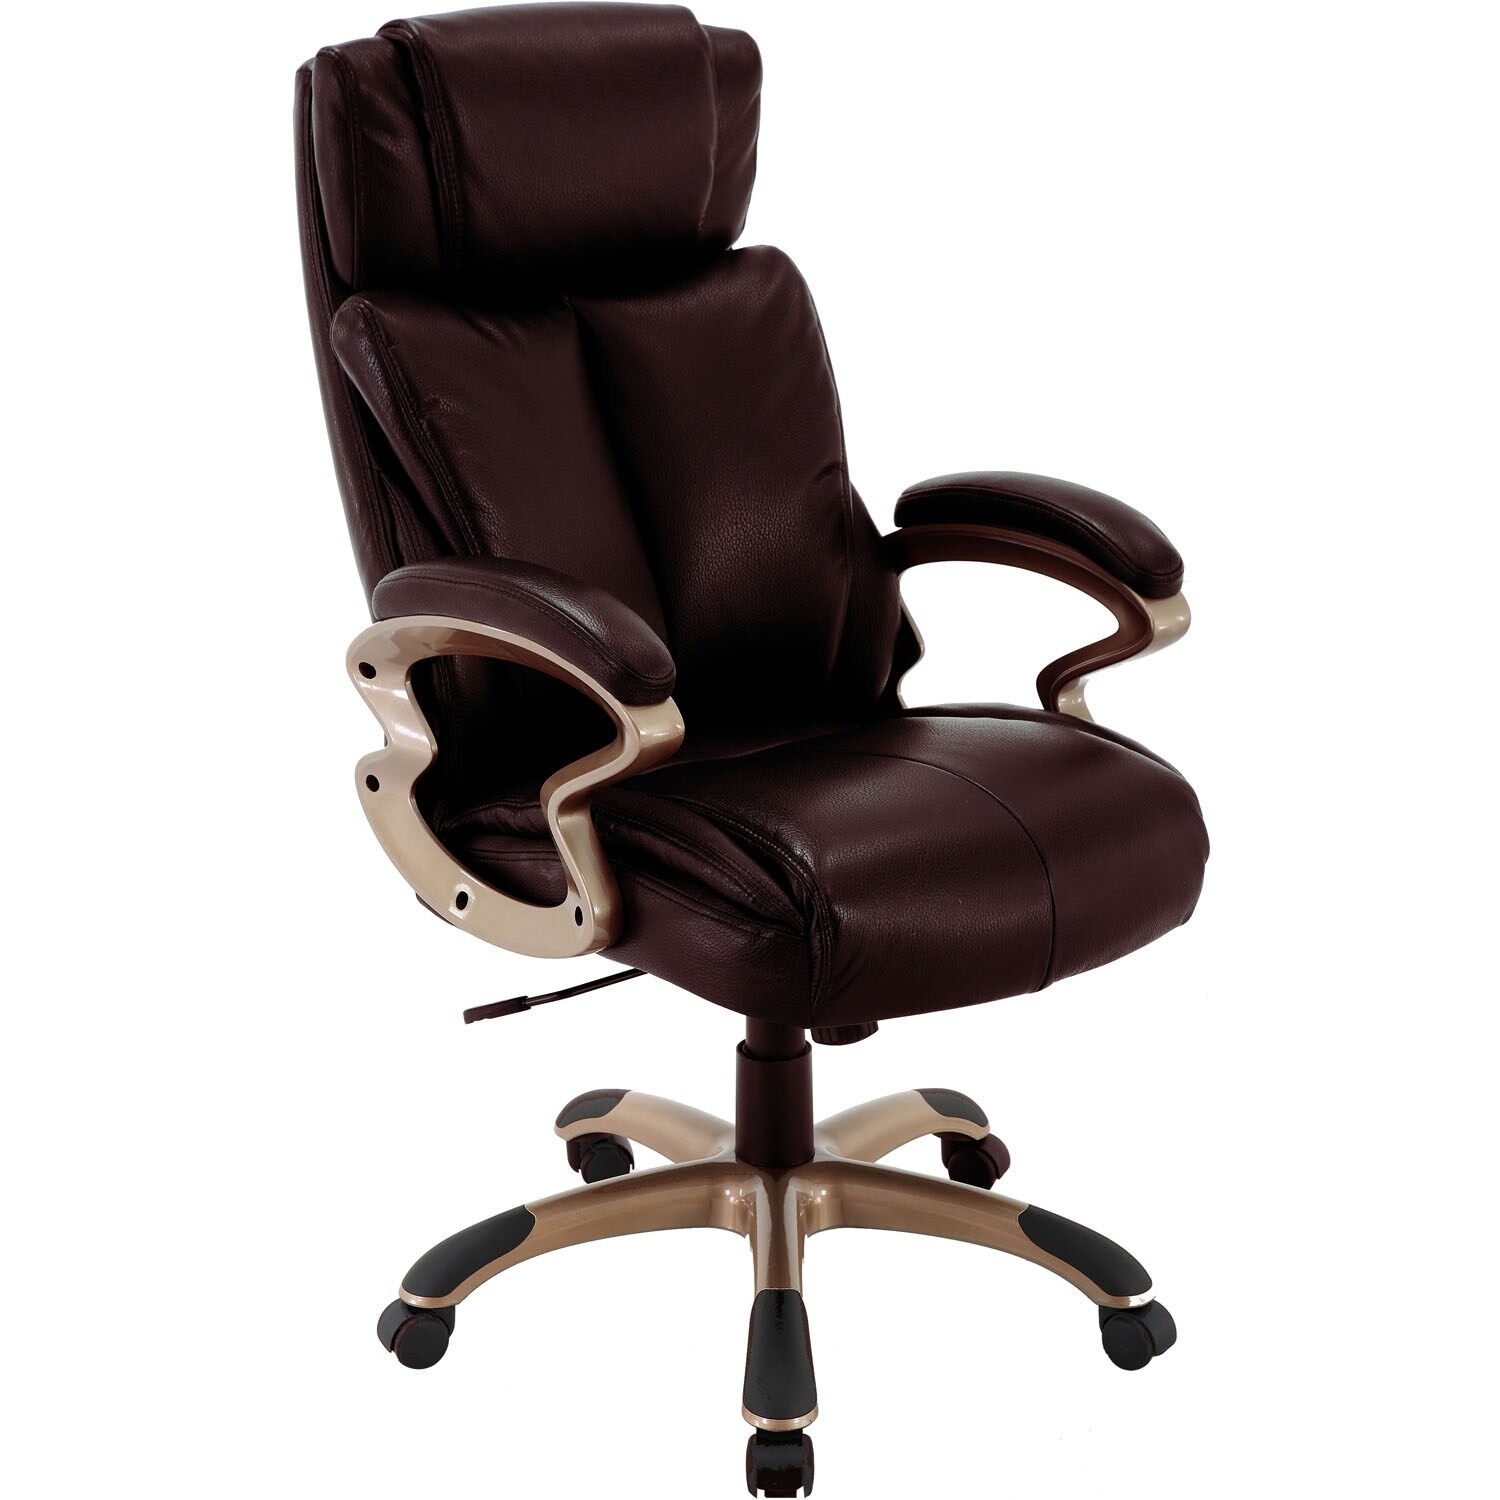 Hanover Atlas Executive Office Chair with Upholstered Faux-Leather Seat in Brown and Copper-Wheeled Base